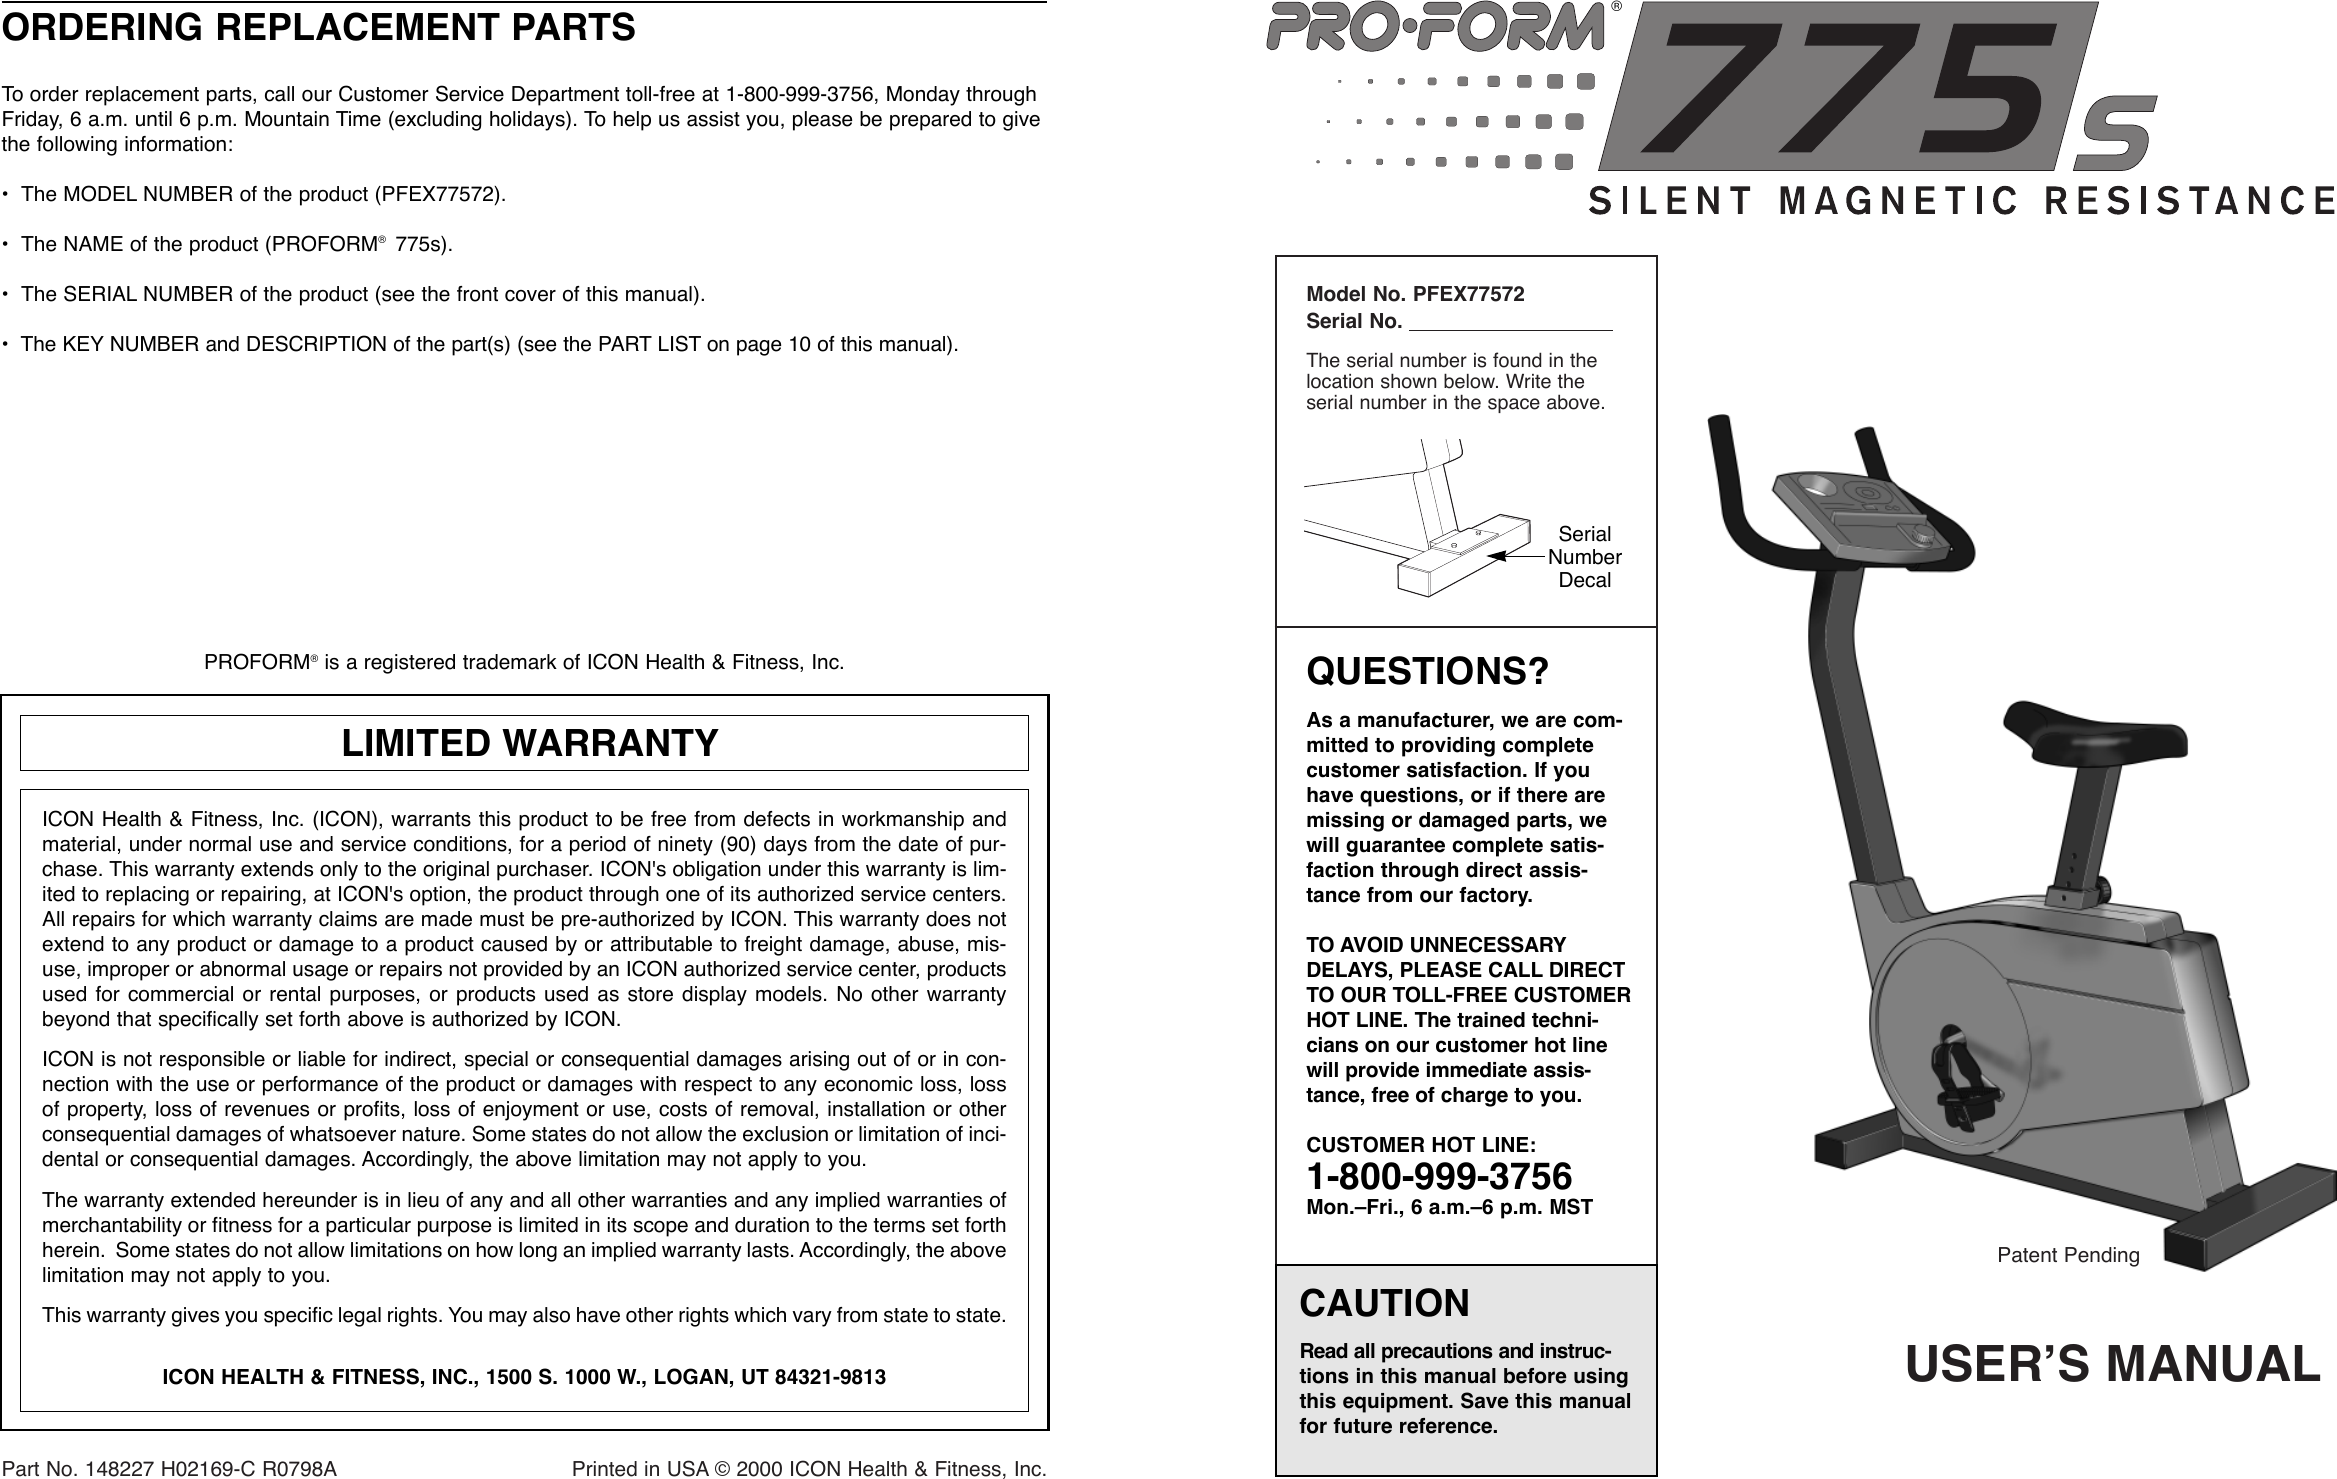 Page 1 of 6 - Proform Proform-Pfex77572-775S-Bike-Users-Manual- *PFEX77572-148227  Proform-pfex77572-775s-bike-users-manual